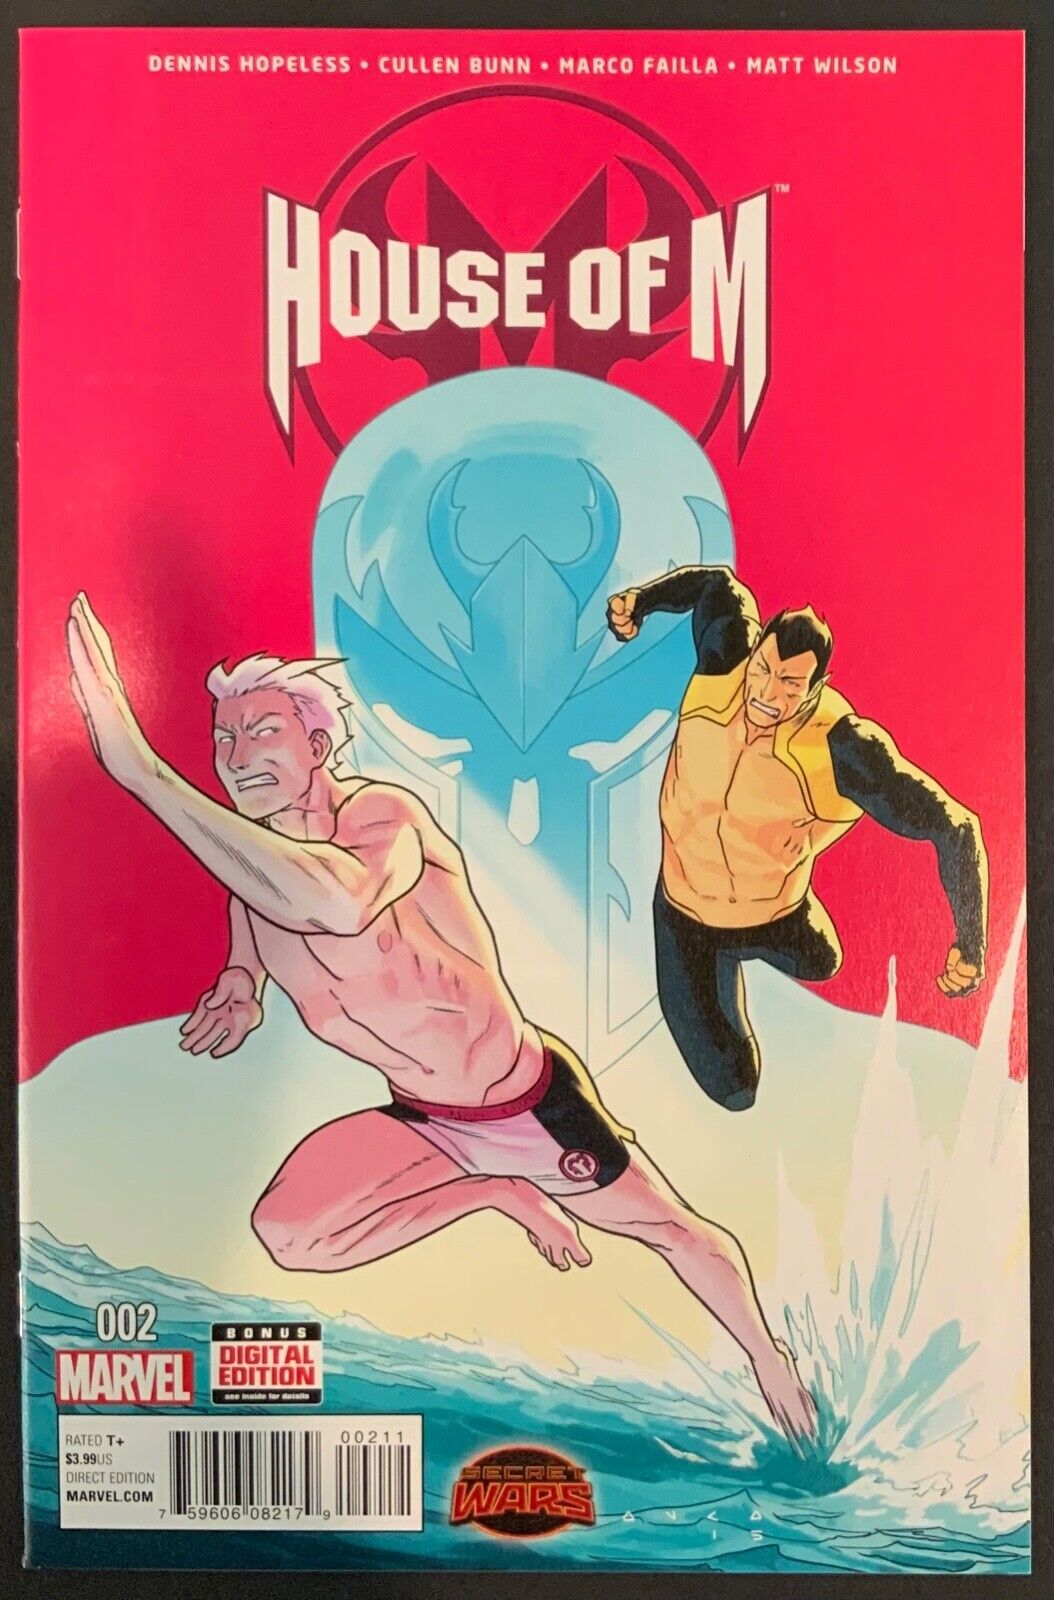 House of M #2 vol.2 In 9.8 NM-MT with White pages | eBay